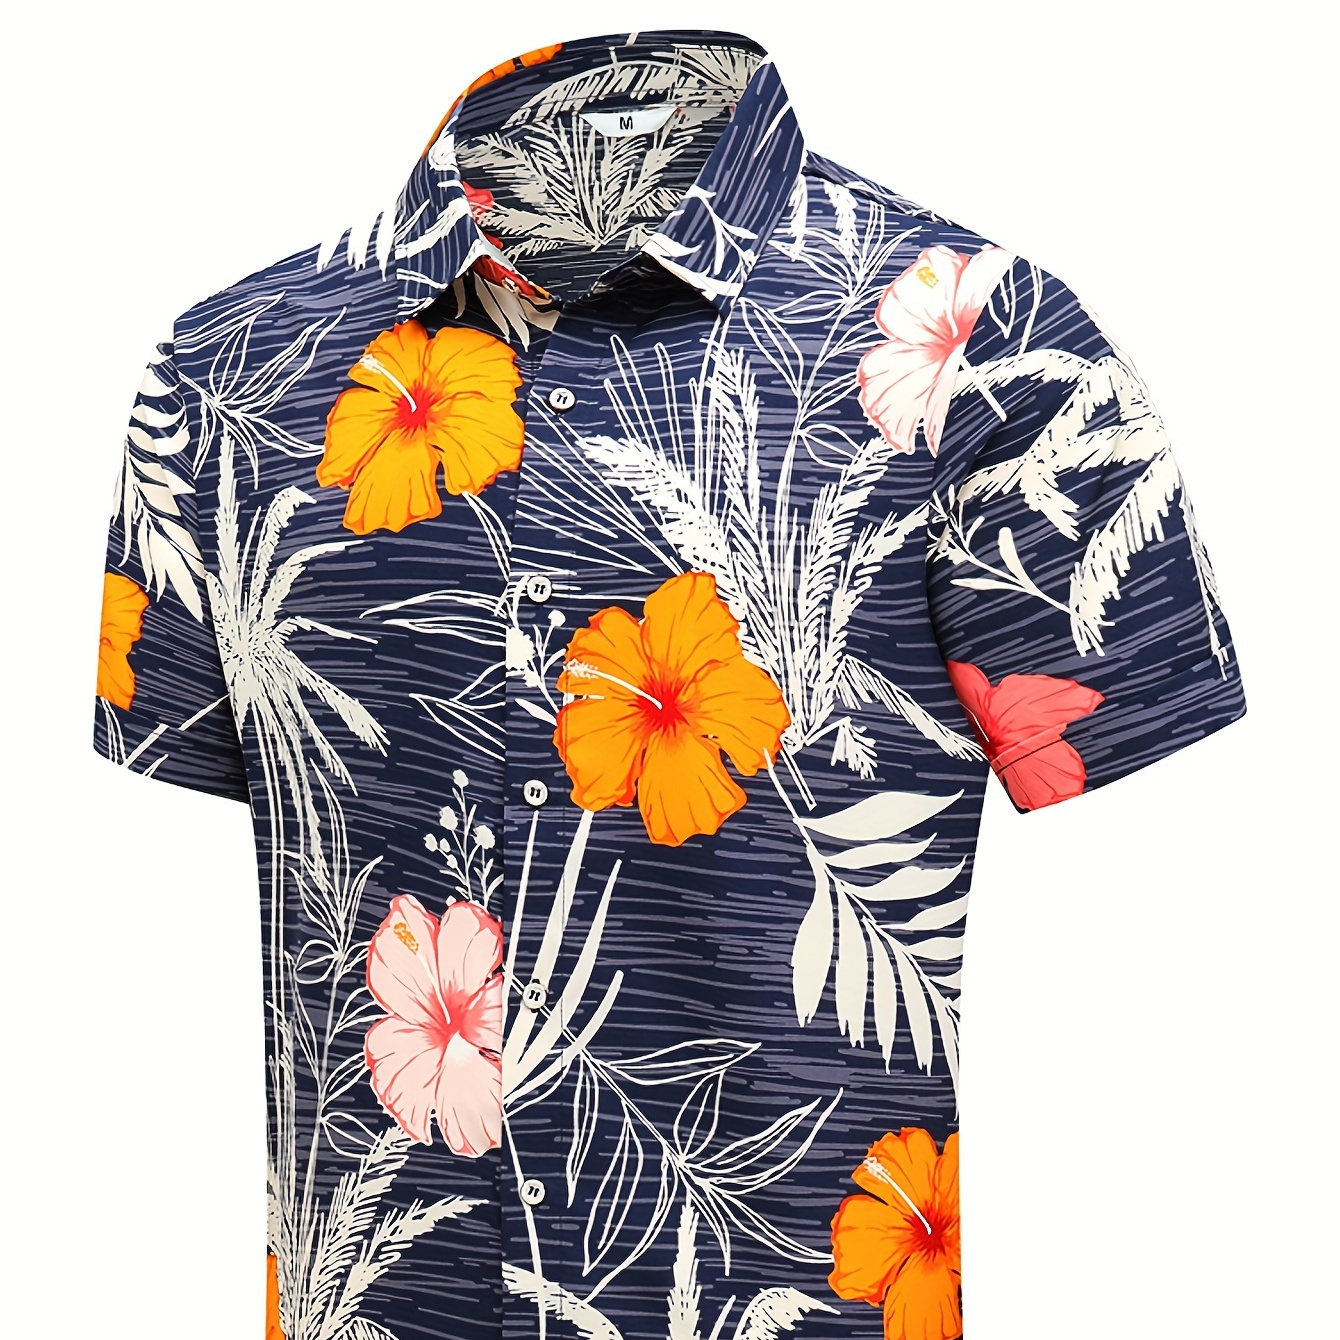 

Blue Flowers, Hawaiian Men's Shirt, Unisex Summer Vacation Beach Casual Short Sleeved Button Up Shirt, Printed Tropical Floral And Plant Elements Clothing